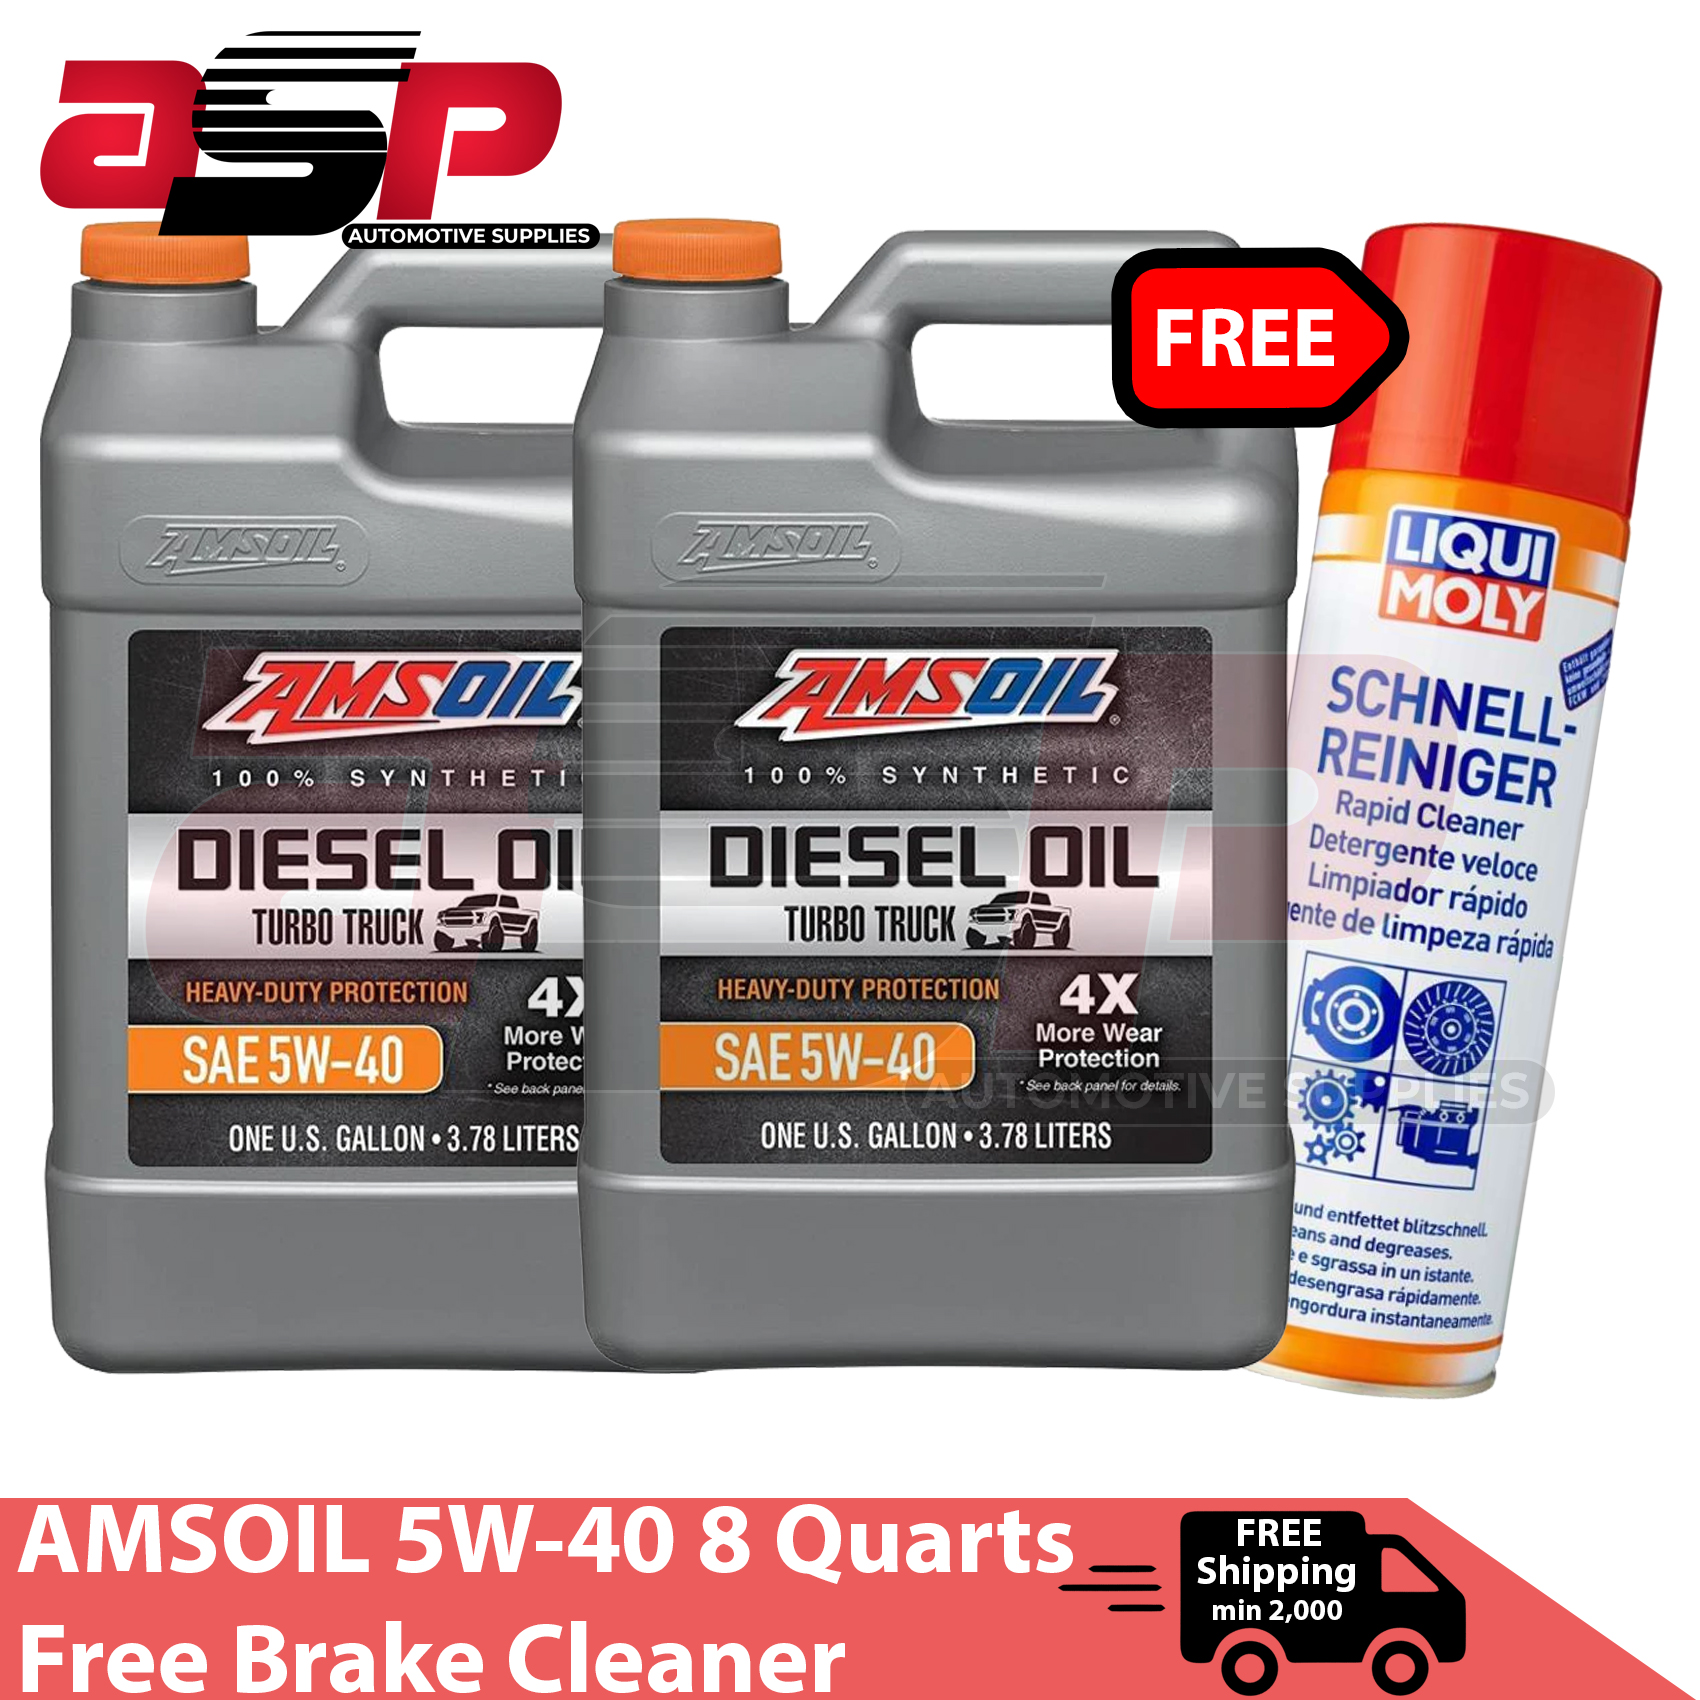 Download Amsoil Heavy Duty Diesel Oil Review Photos